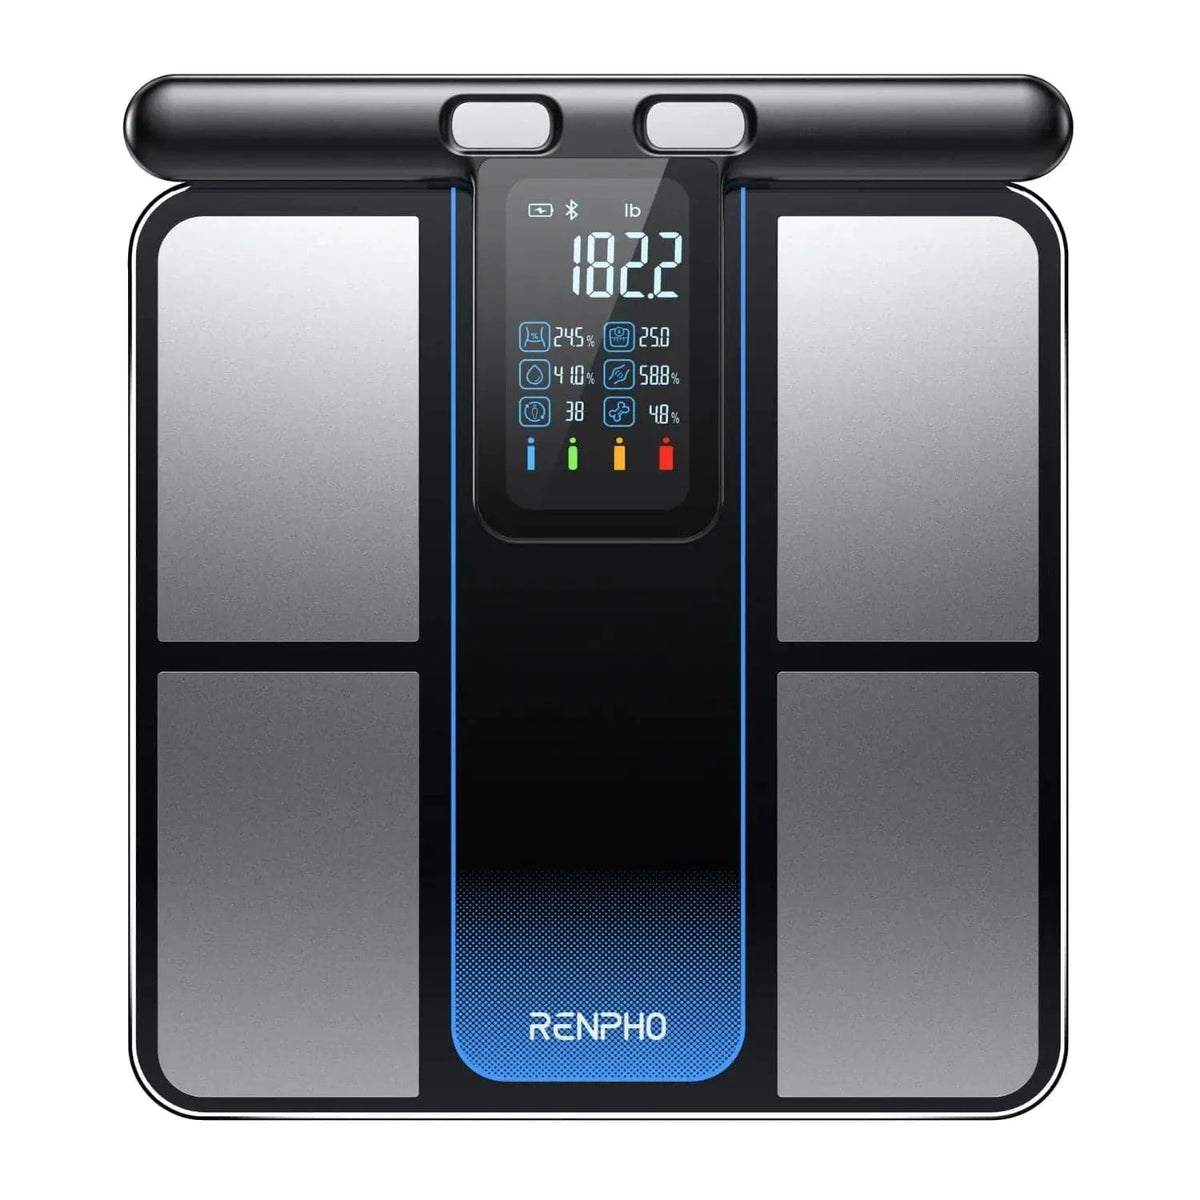 A digital MorphoScan Smart Body Scale by Renpho AU shown from above. The scale features a black and silver design with a rectangular LED display in the center. The display shows a weight of 182.2 pounds along with various health metrics symbols, offering comprehensive body composition analysis to aid in your health and fitness journey.